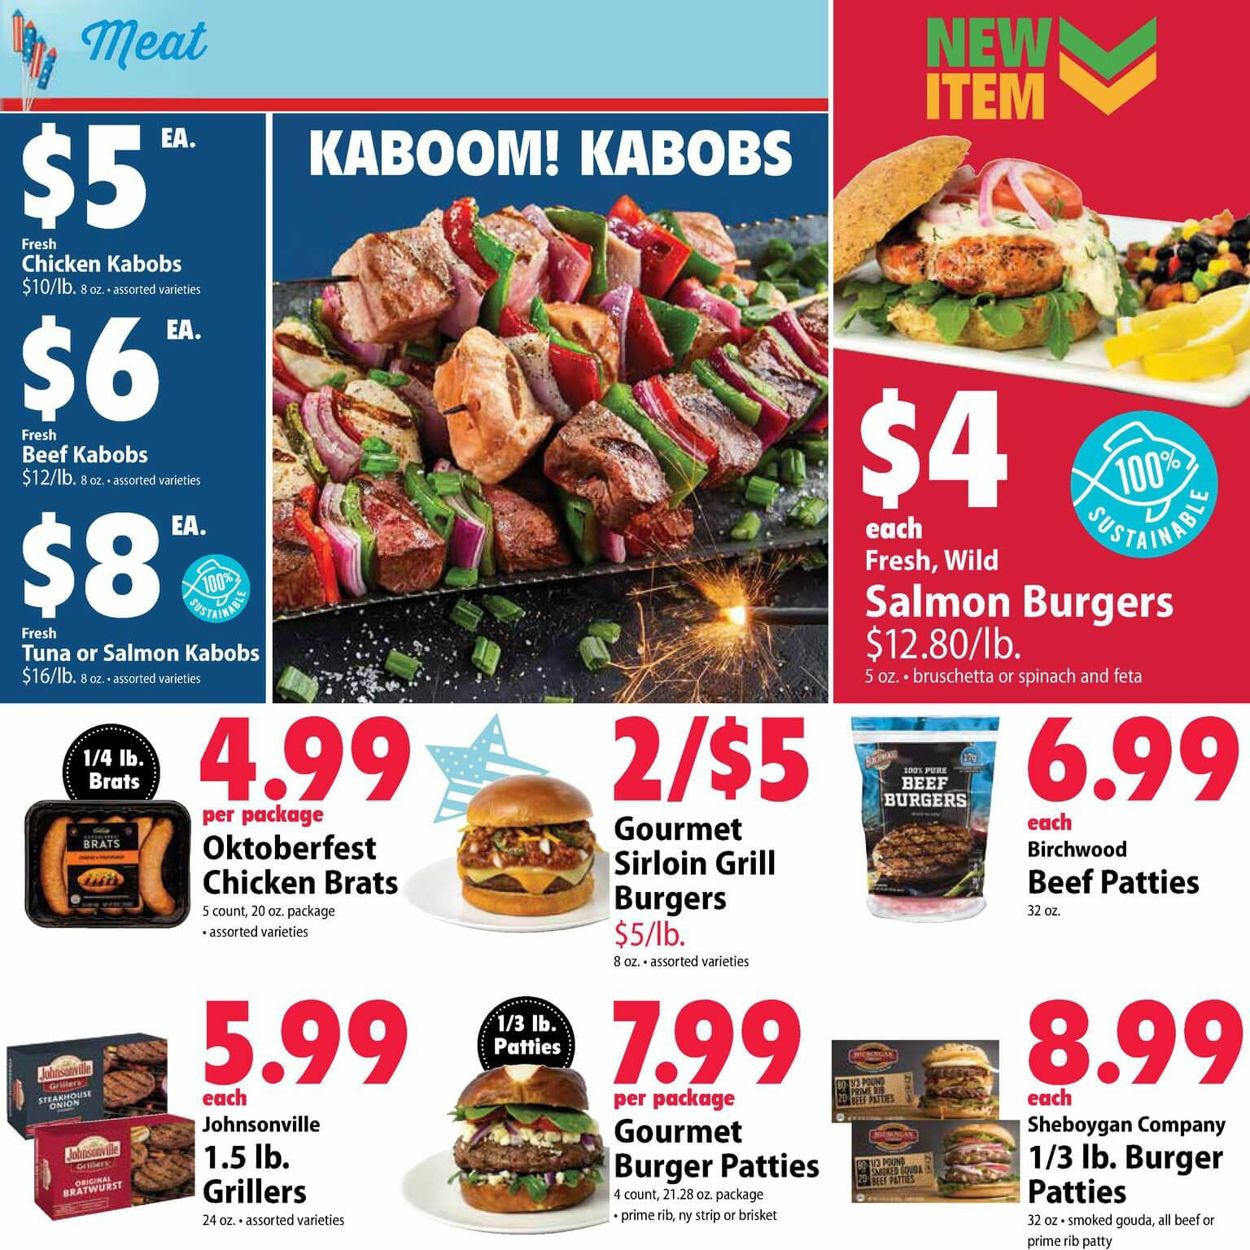 Festival Foods Current weekly ad 06/26 07/02/2019 [5]